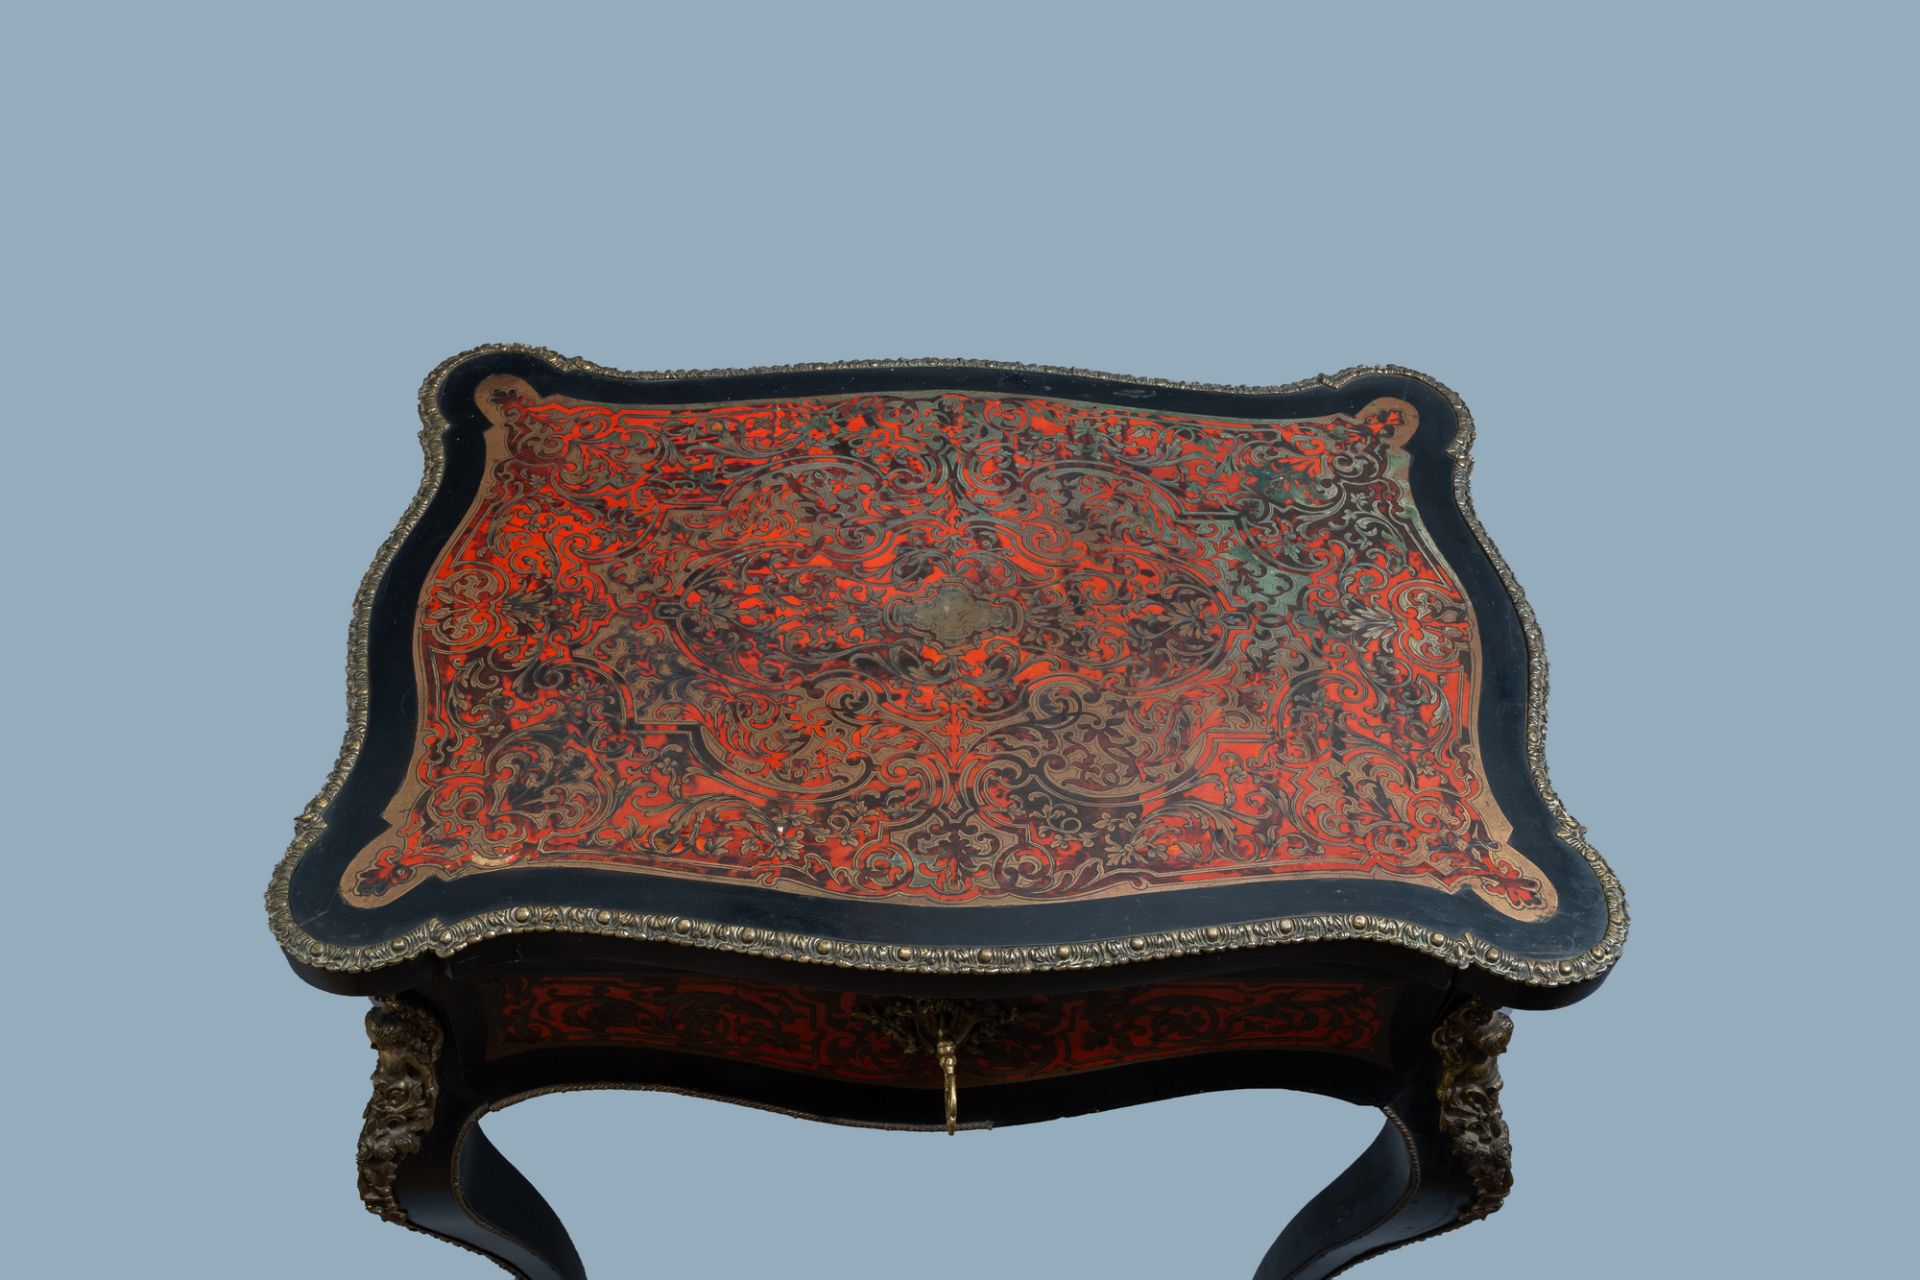 A French Historicism gilt mounted and brass marquetry sewing table, L. Grade F. - R(ue) Castex 9, 19 - Image 13 of 13